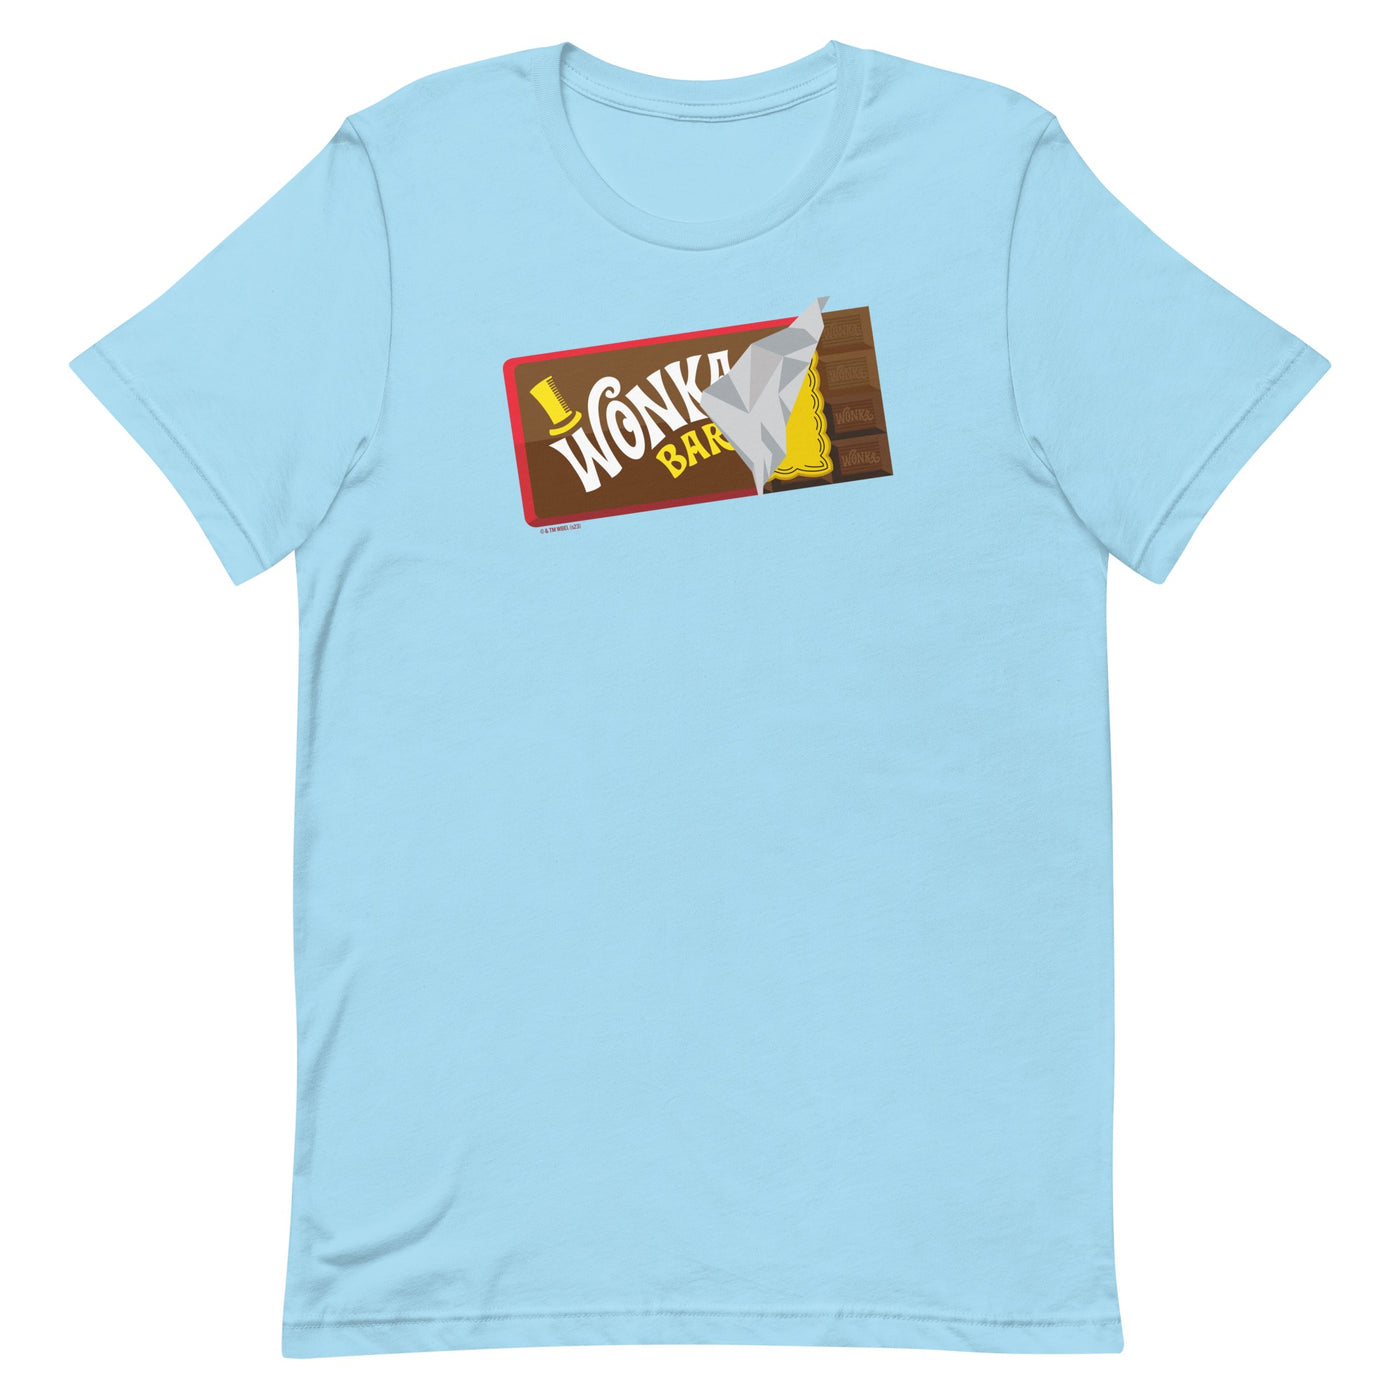 Willy Wonka & the Chocolate Factory Fifth Golden Ticket T-Shirt